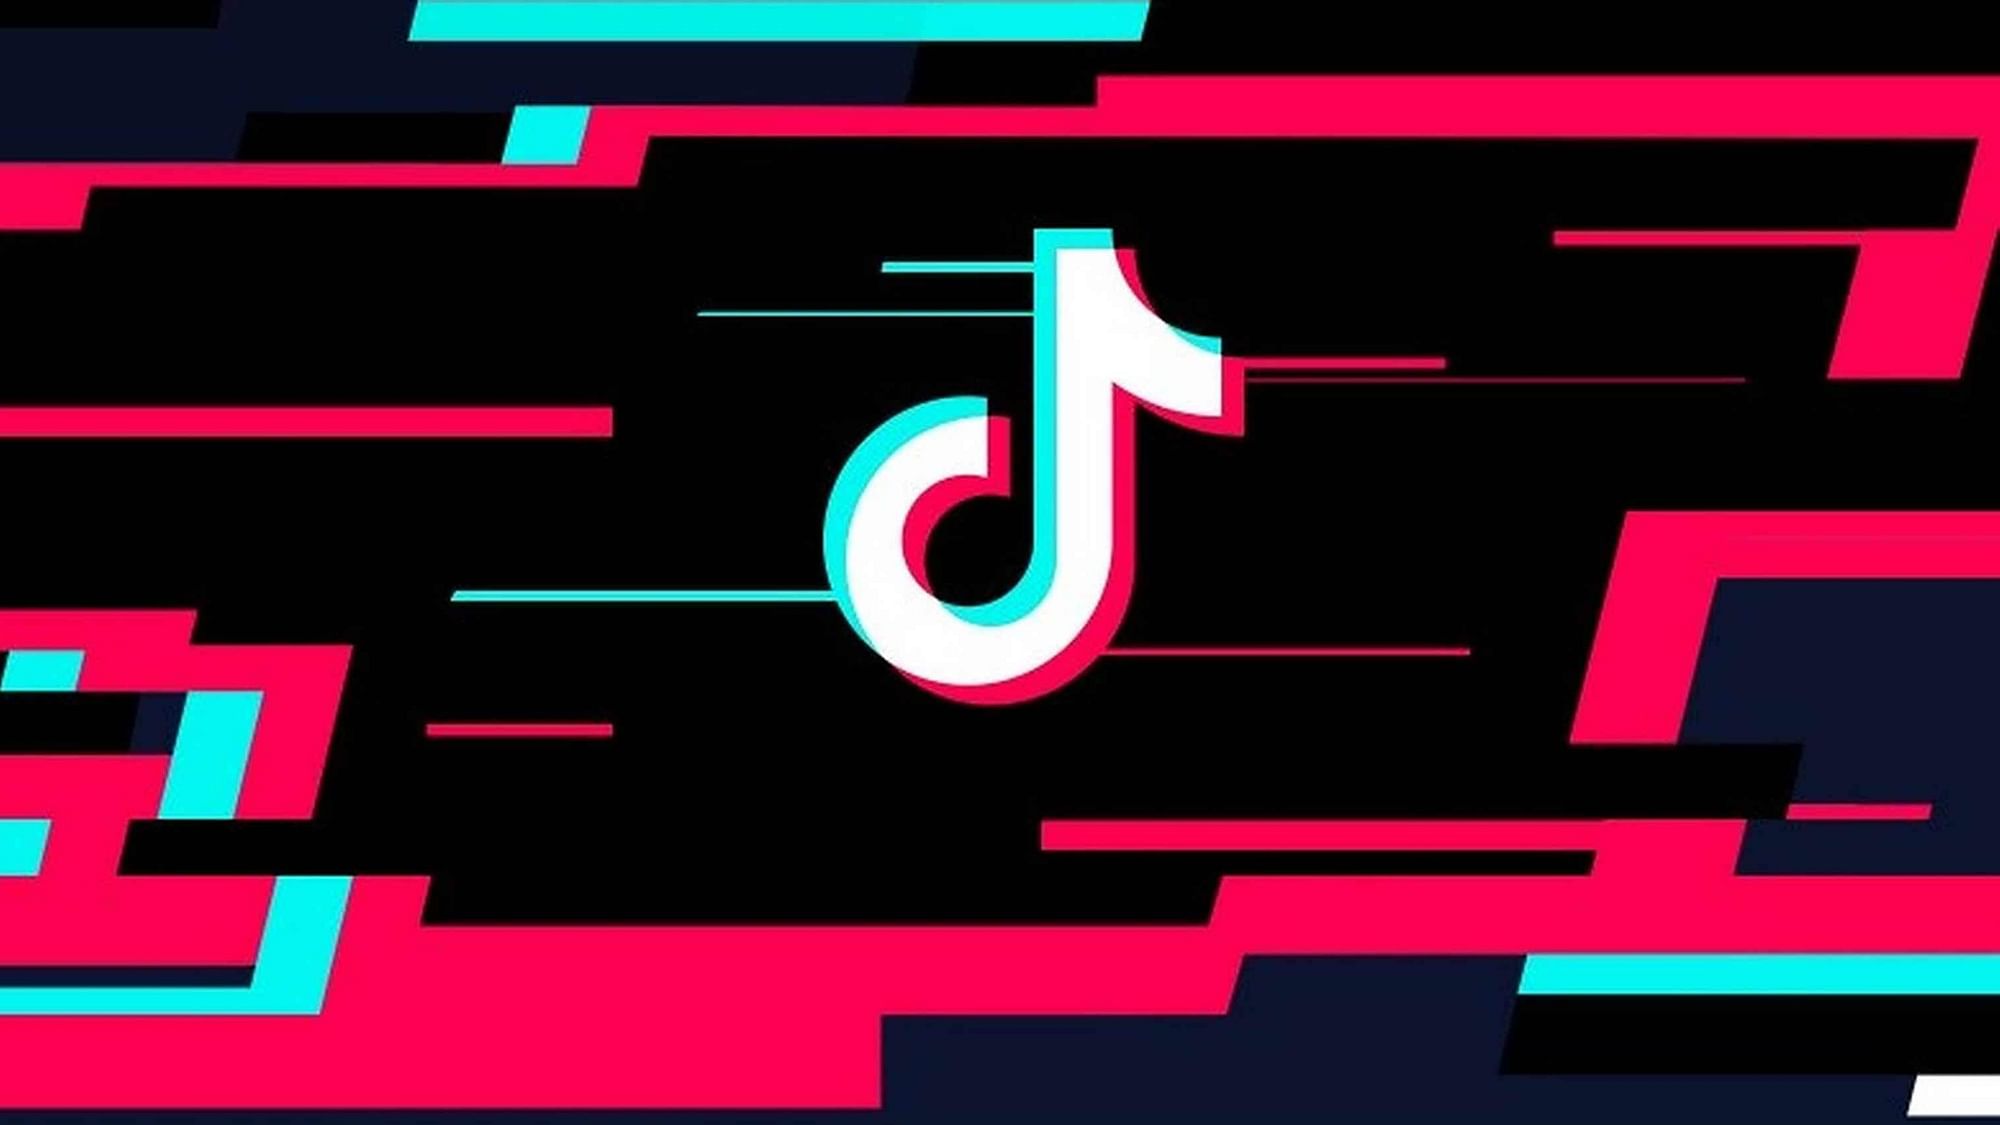 Created by ByteDance, a Chinese Internet technology company, Tik Tok has gained massive popularity across Asia clocking over 500 million users.&nbsp;